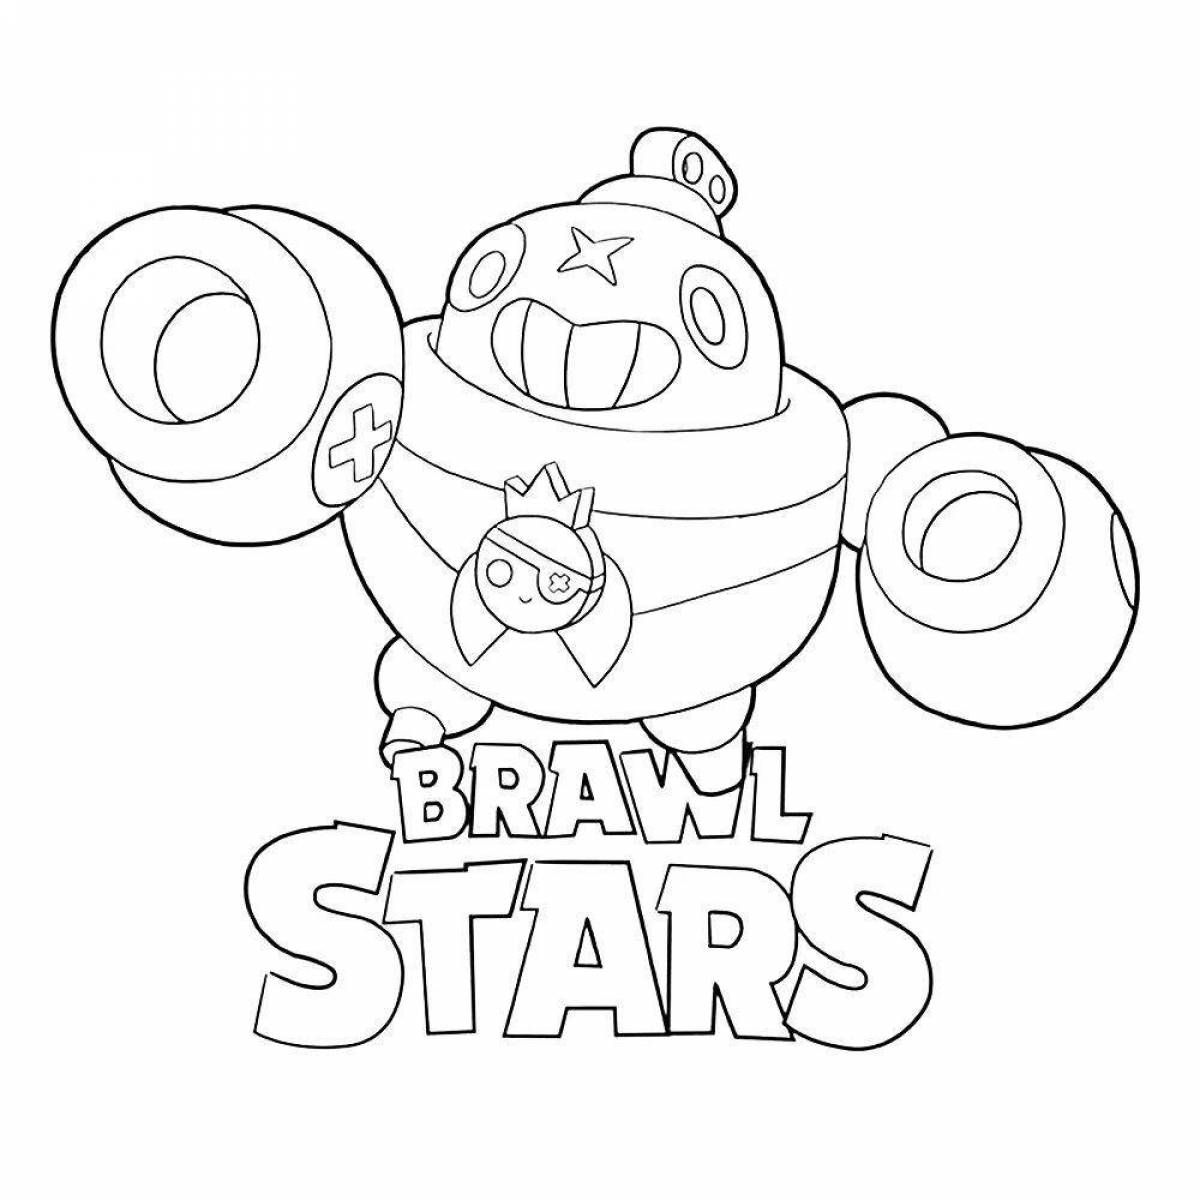 Colorful brown stars coloring page